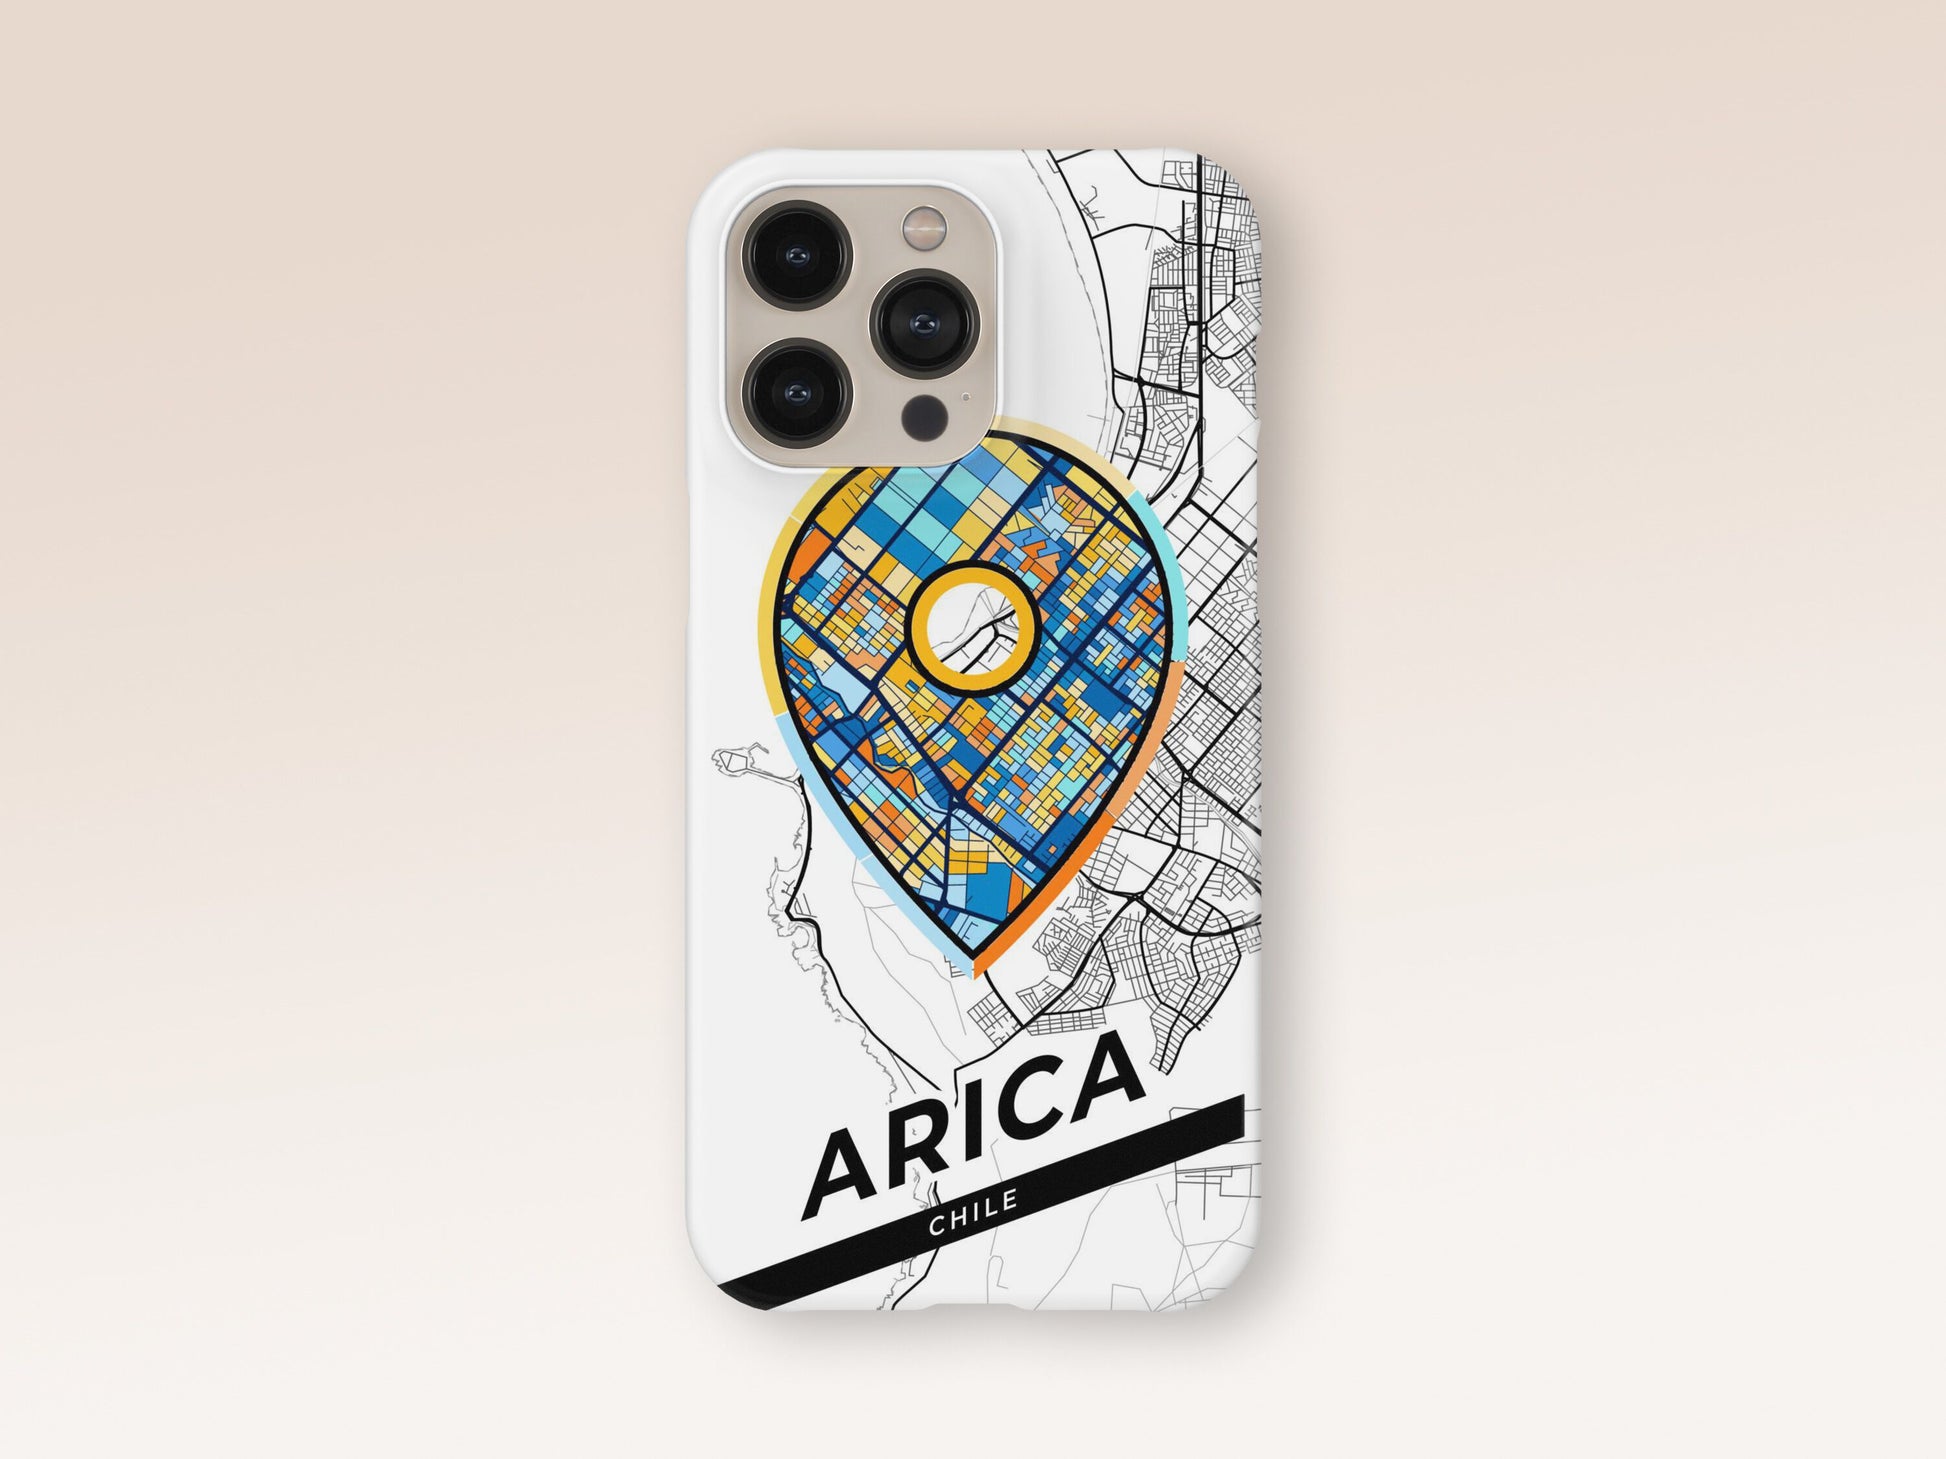 Arica Chile slim phone case with colorful icon. Birthday, wedding or housewarming gift. Couple match cases. 1